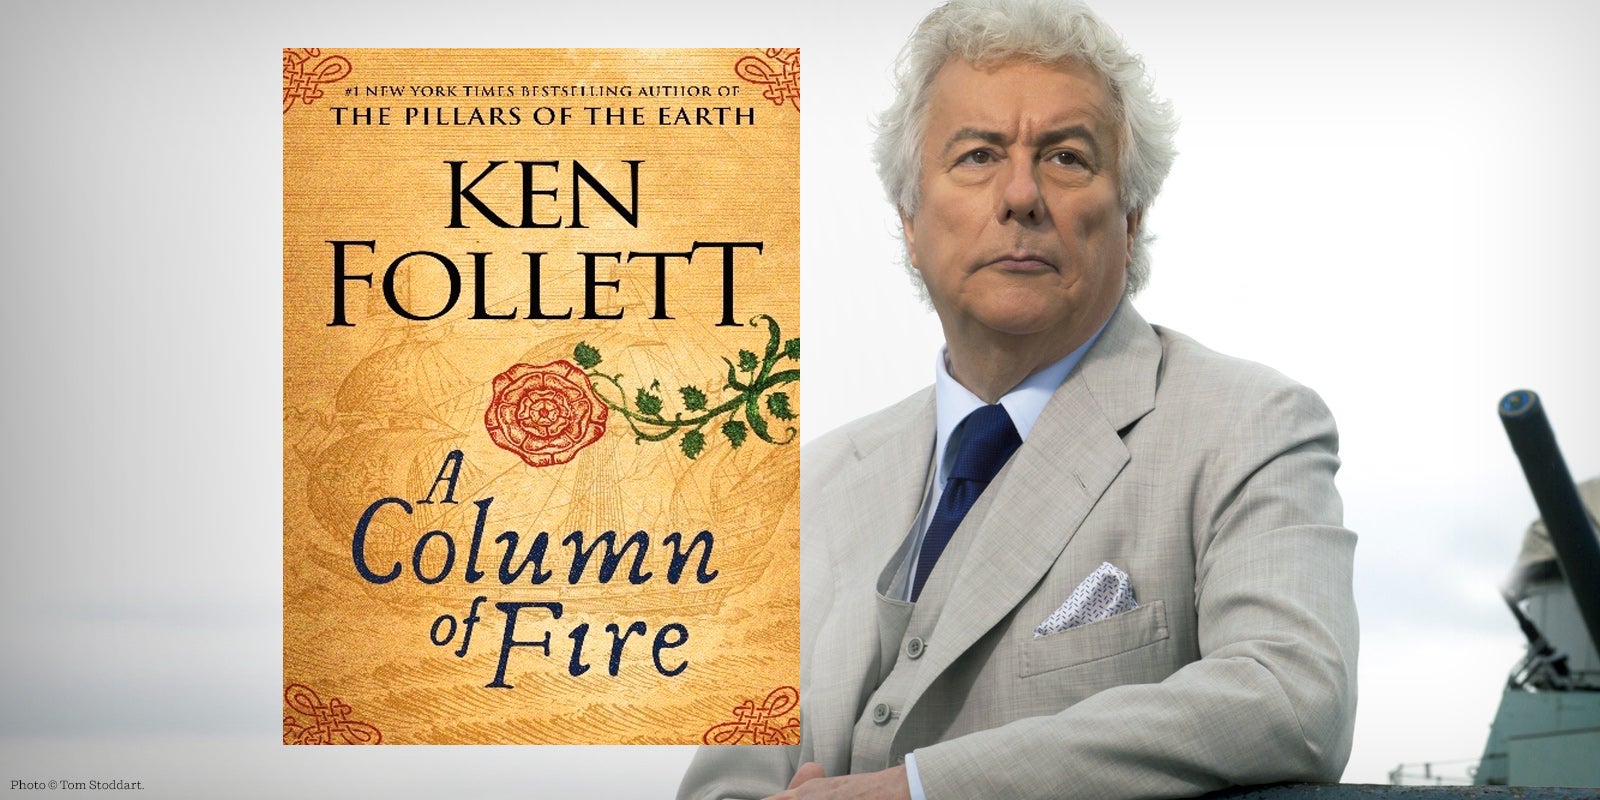 #1 bestselling author Ken Follett’s Kingsbridge saga continues with a magnificent new epic.